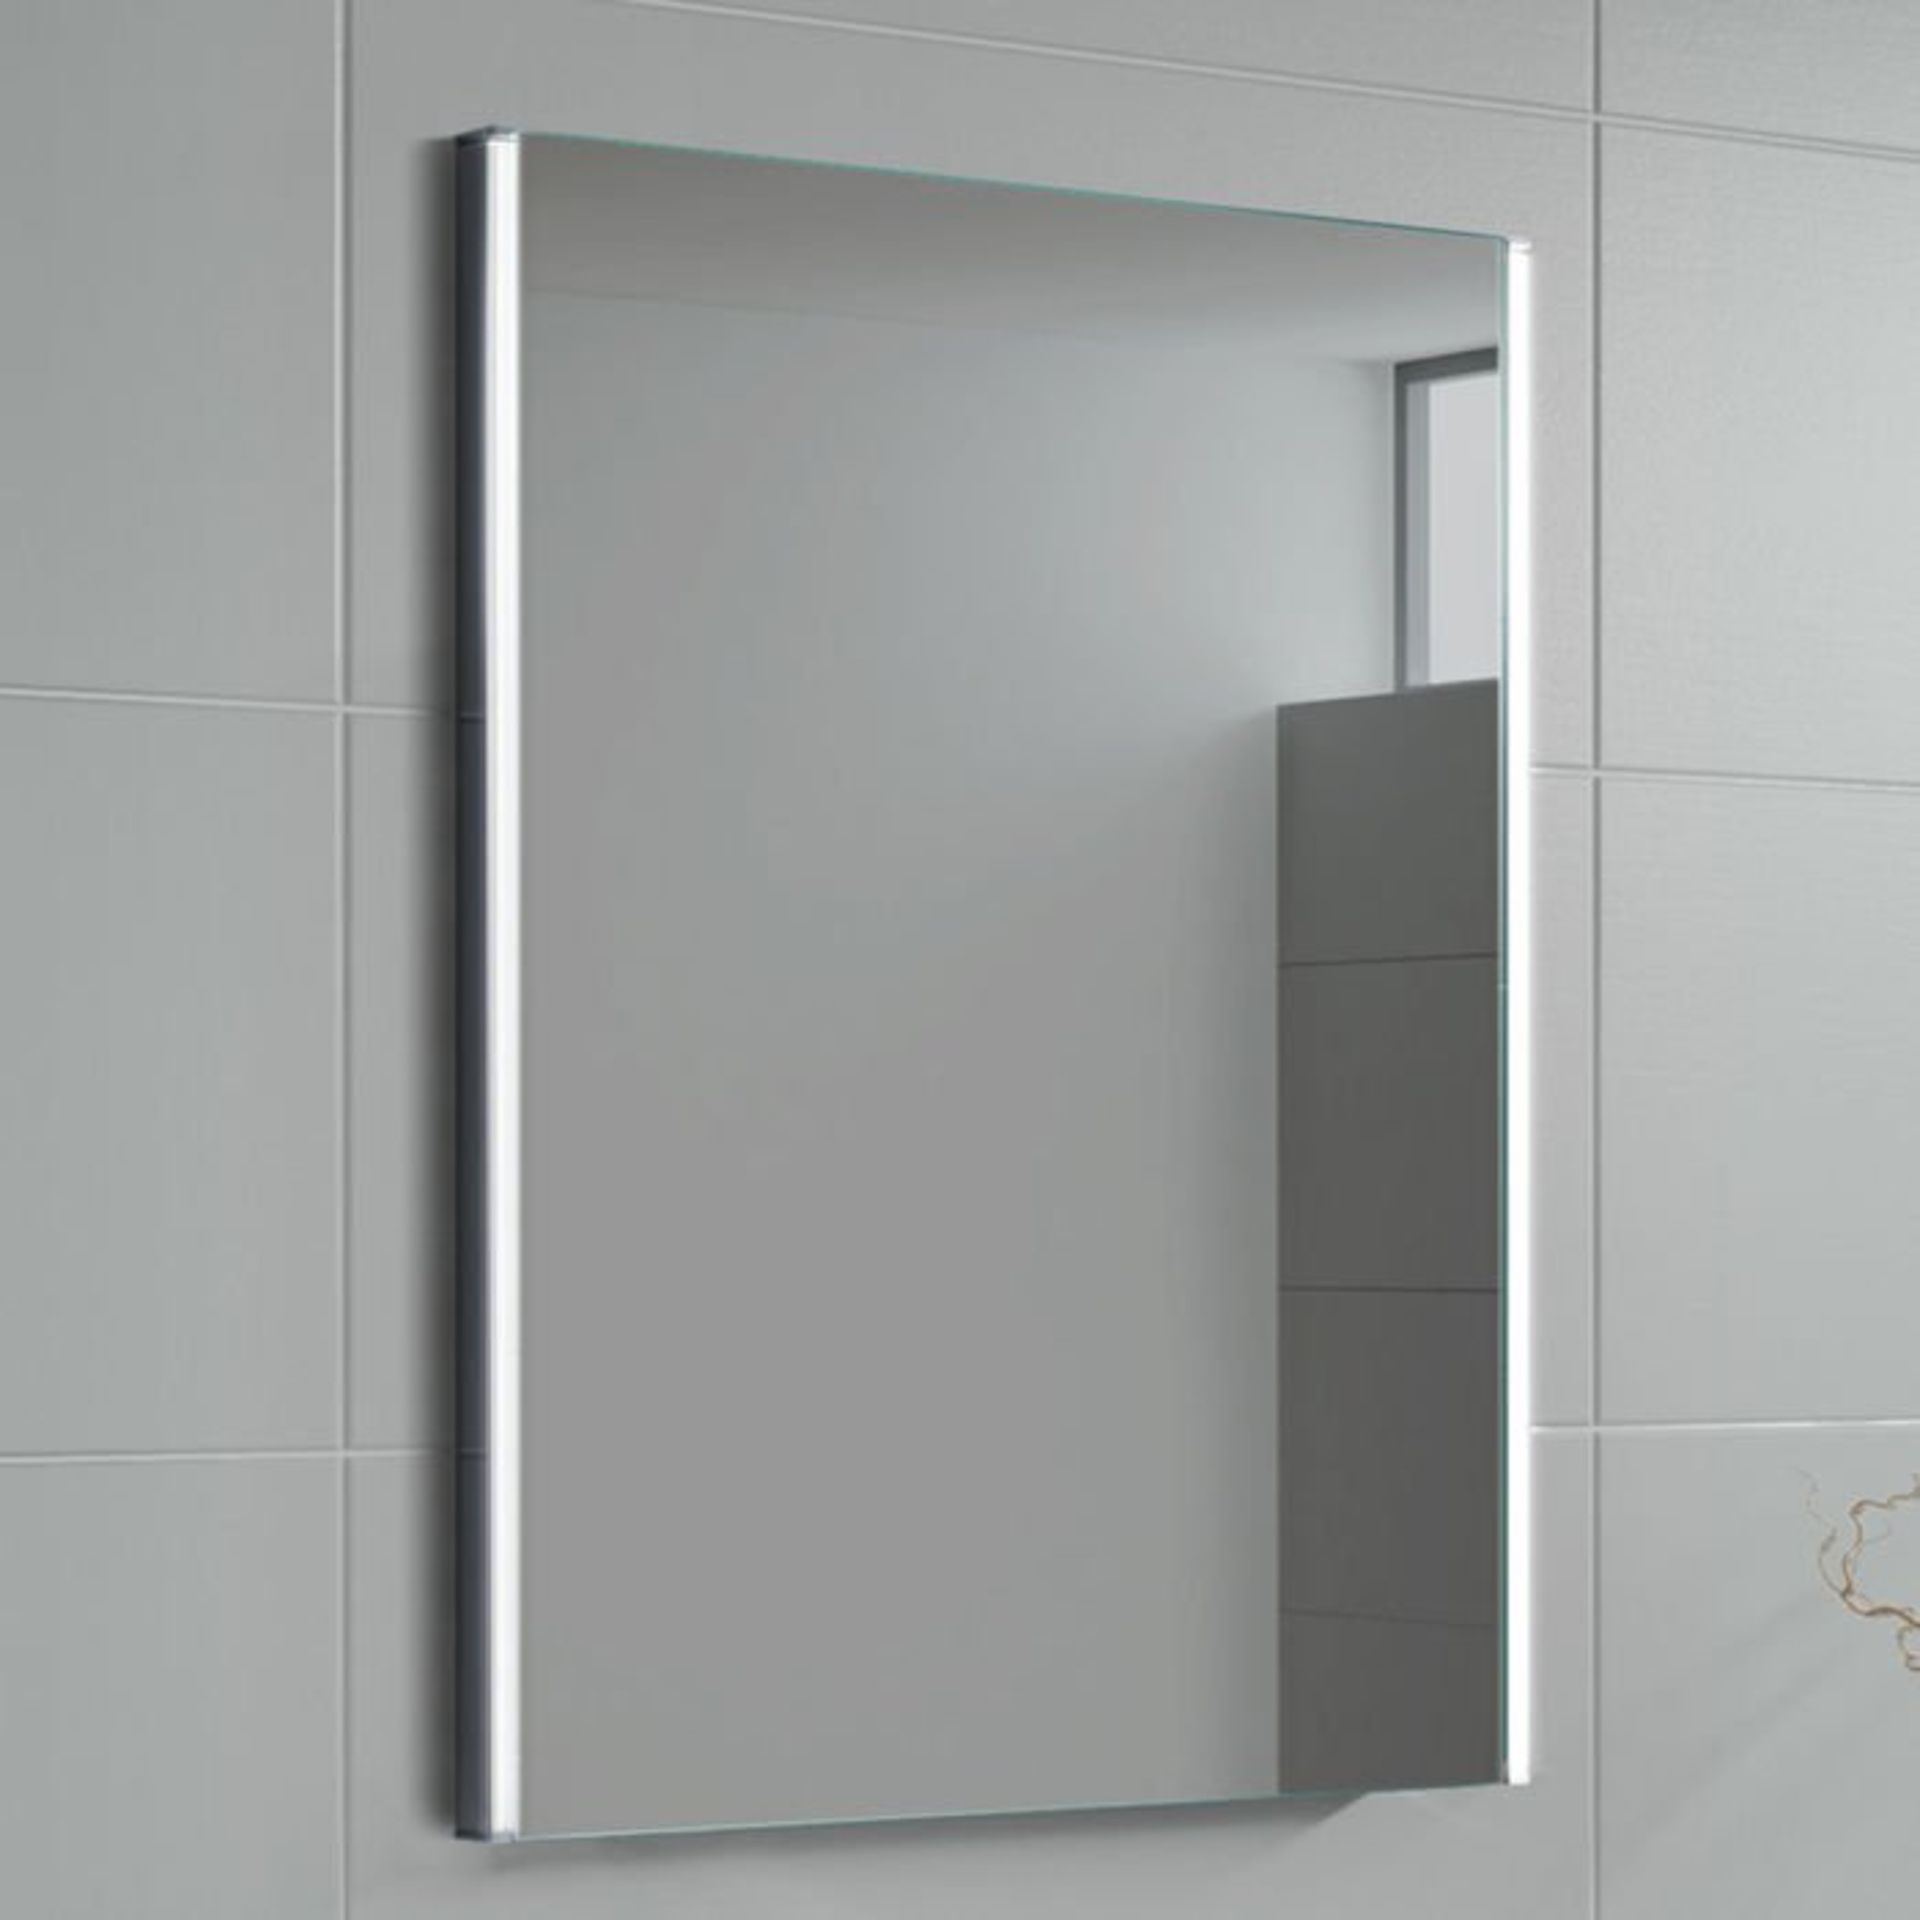 (G209) 700x500mm Lunar Illuminated LED Mirror - Switch Control. RRP £349.99. Energy efficient LED - Image 3 of 3